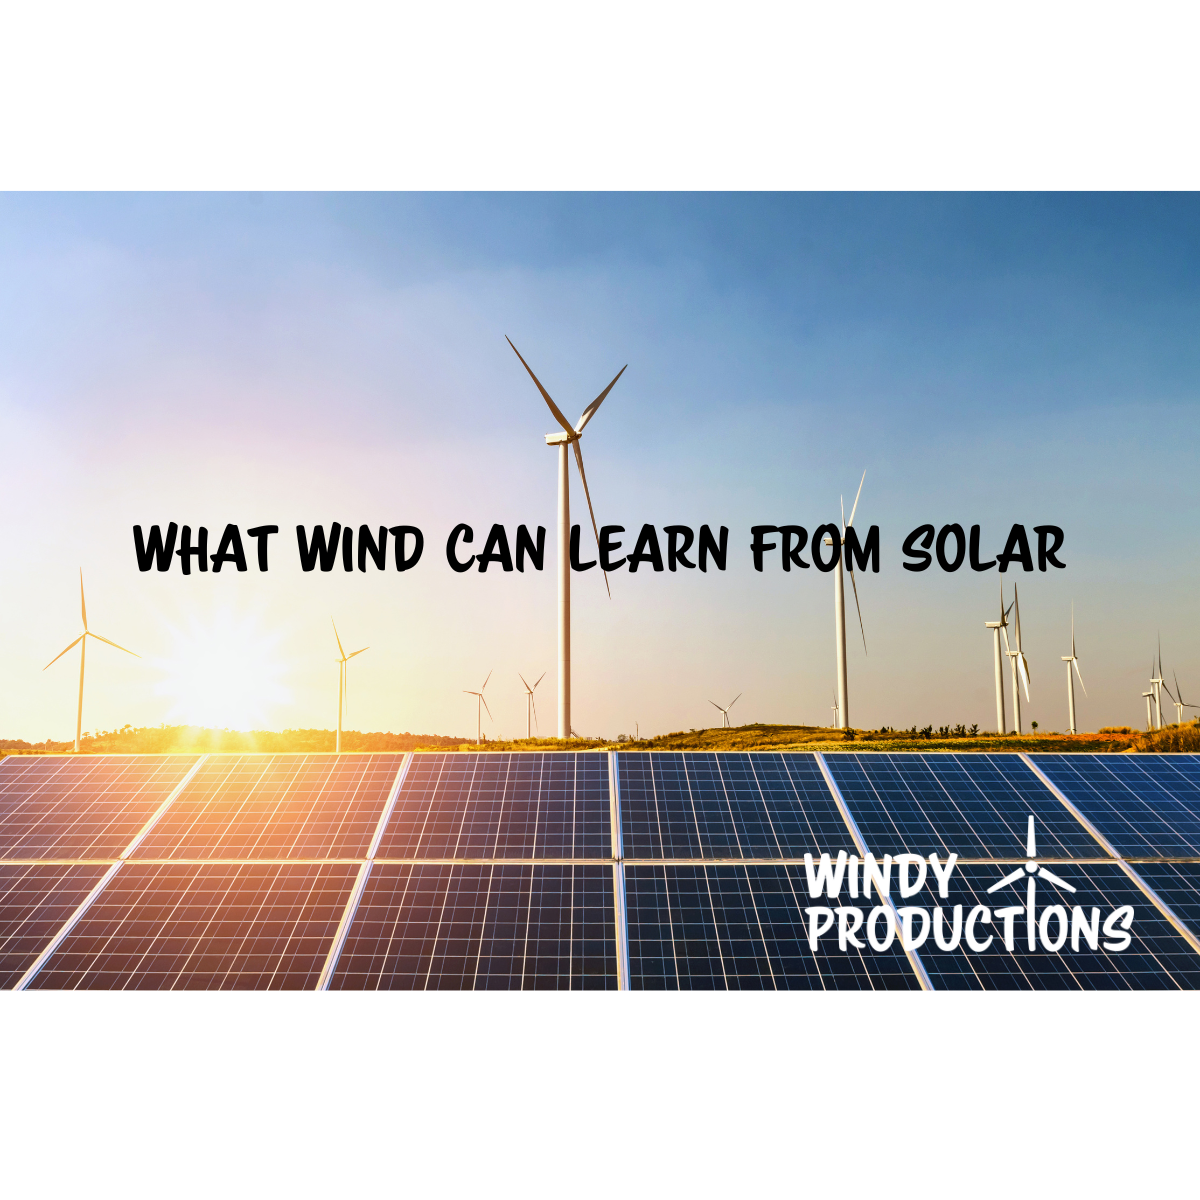 What wind can learn from solar